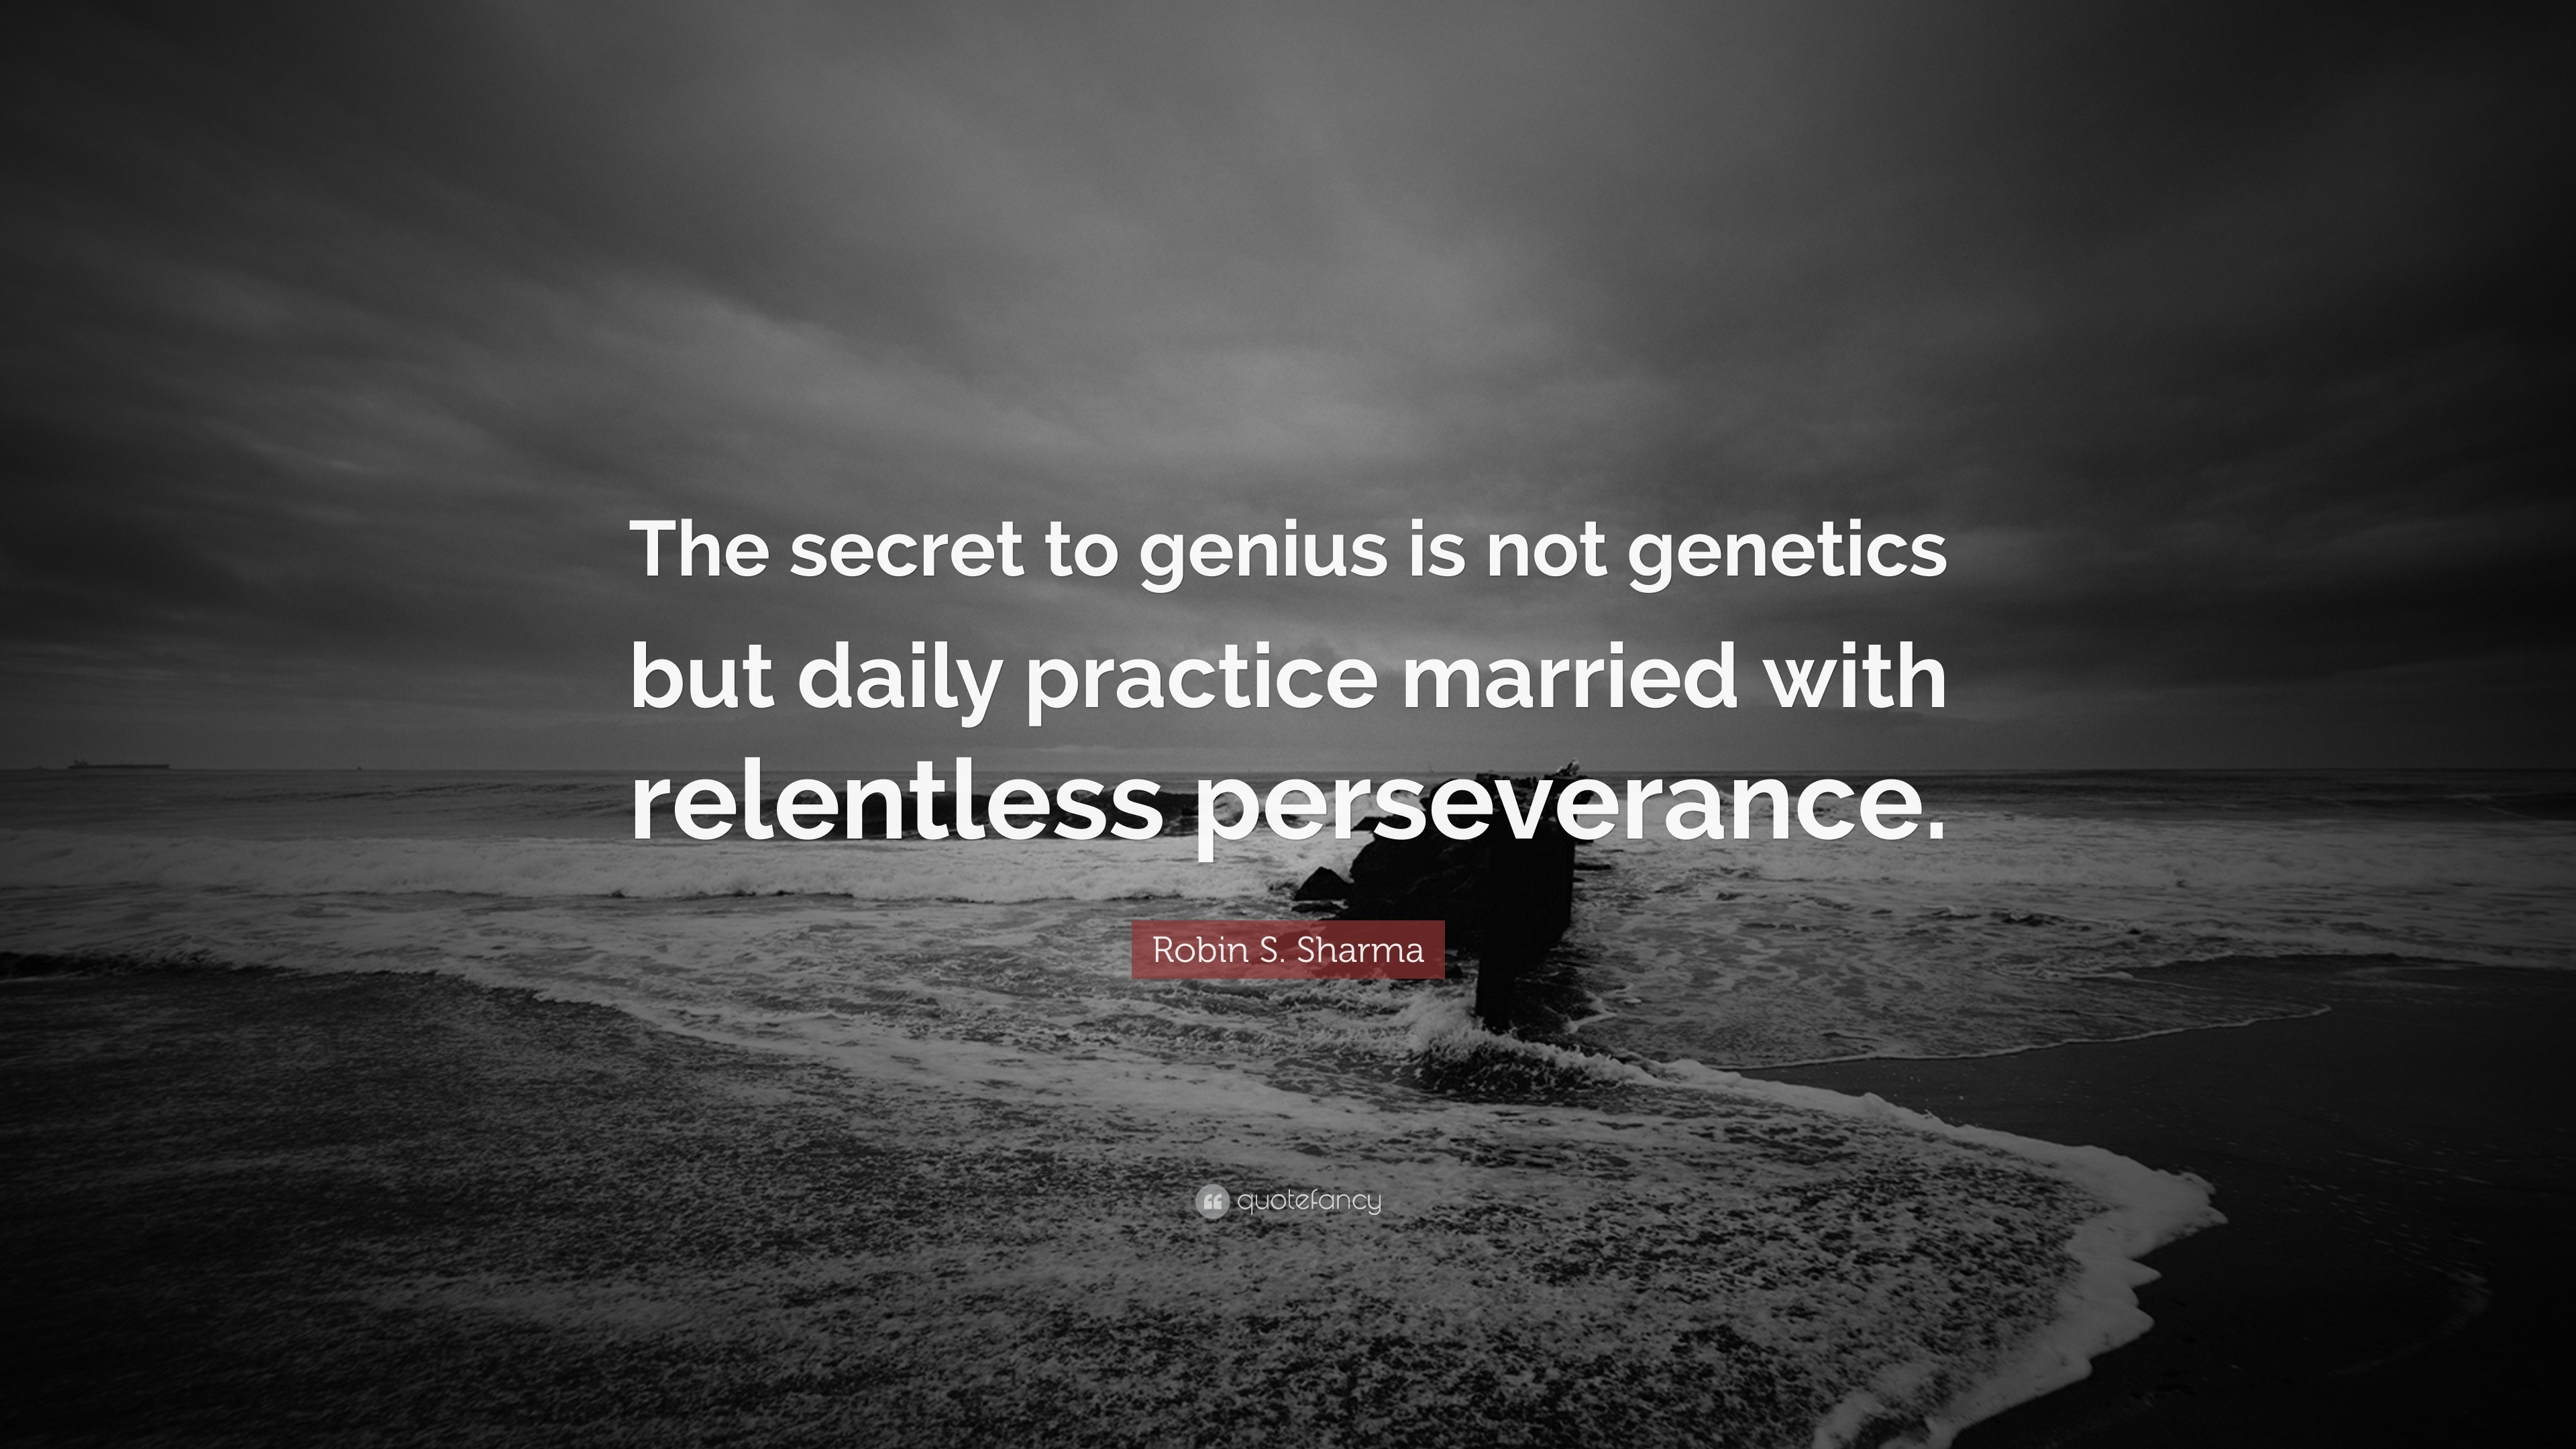 Robin S. Sharma Quote: The secret to genius is not genetics but daily  practice married with